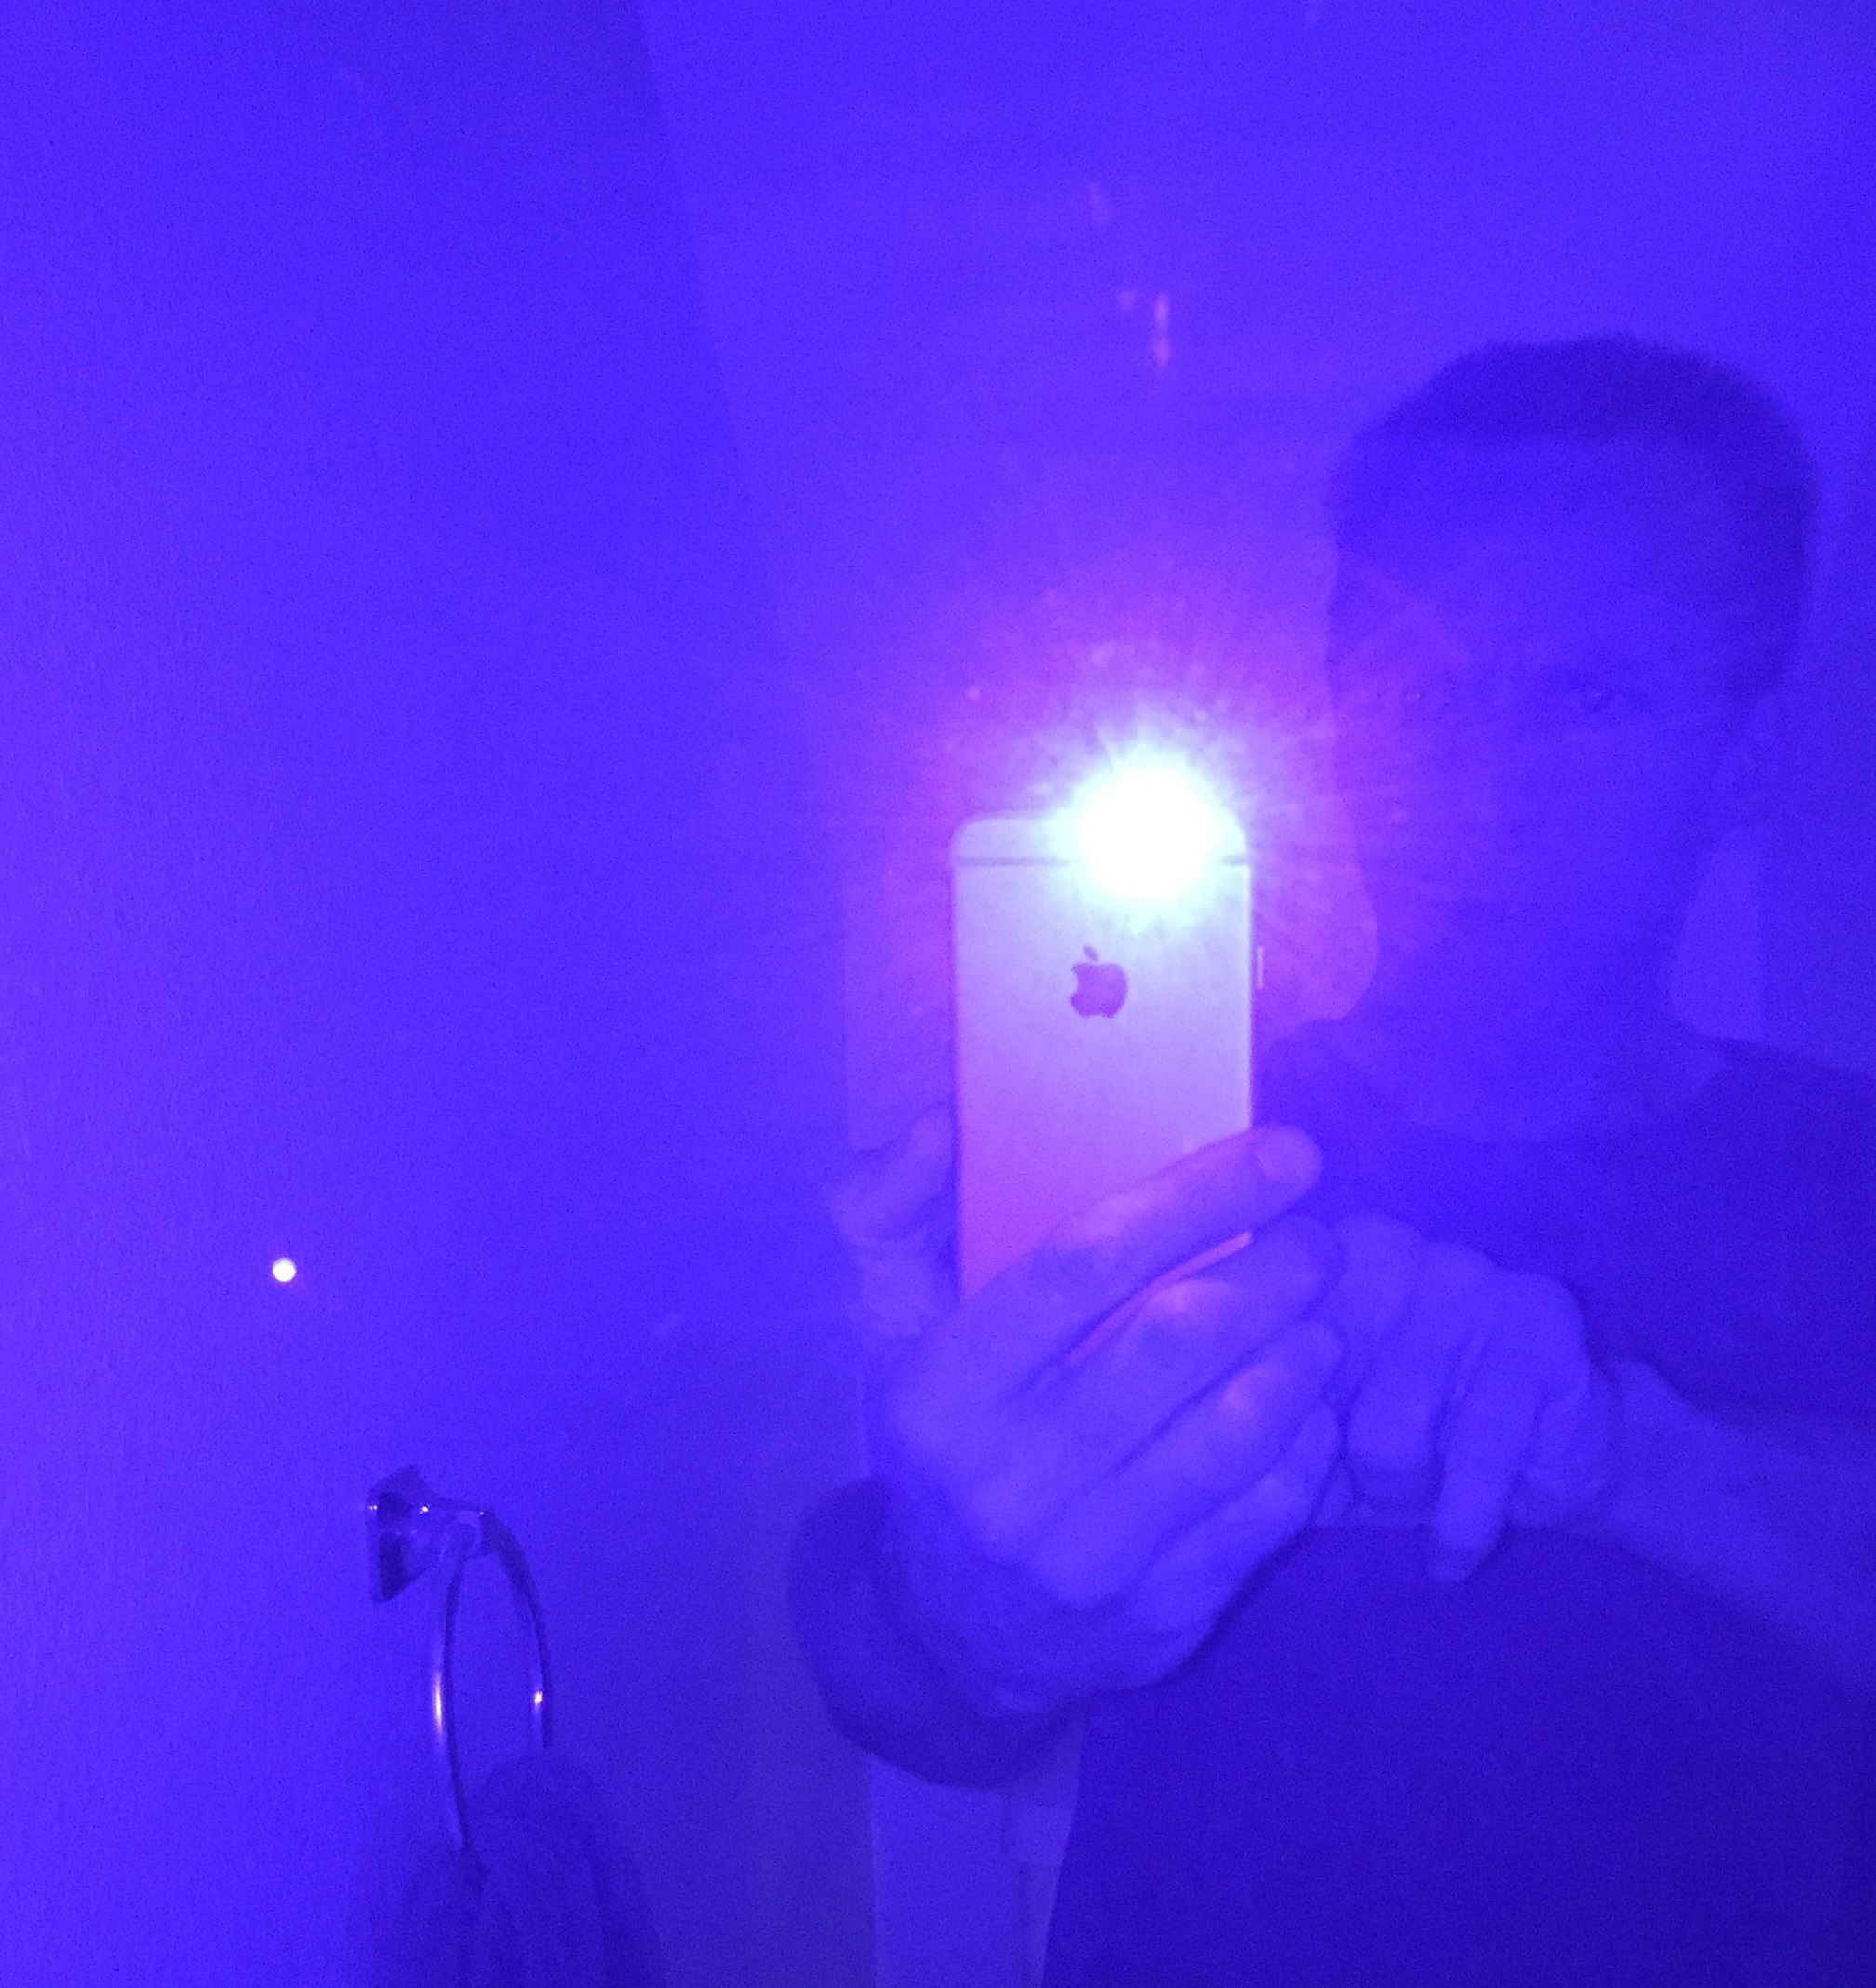 How do I turn my iPhone into a black light?